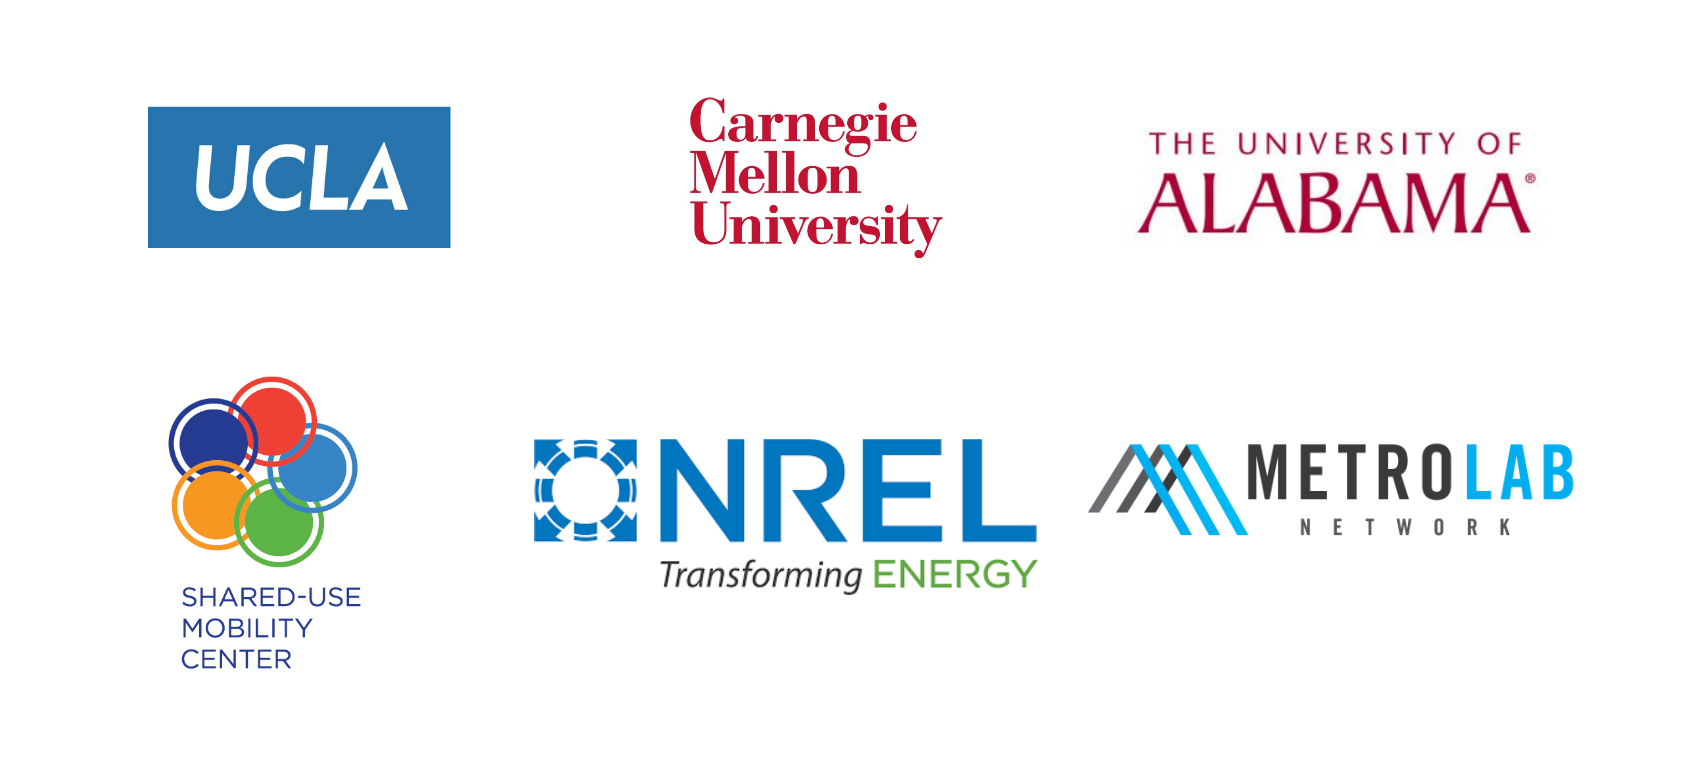 Center of Excellence on New Mobility and Automated Vehicles consortium partners include UCLA, Carnegie Mellon University, Shared Use Mobility Center, National Renewable Energy Laboratory, Metrolab Network, University of Alabama.